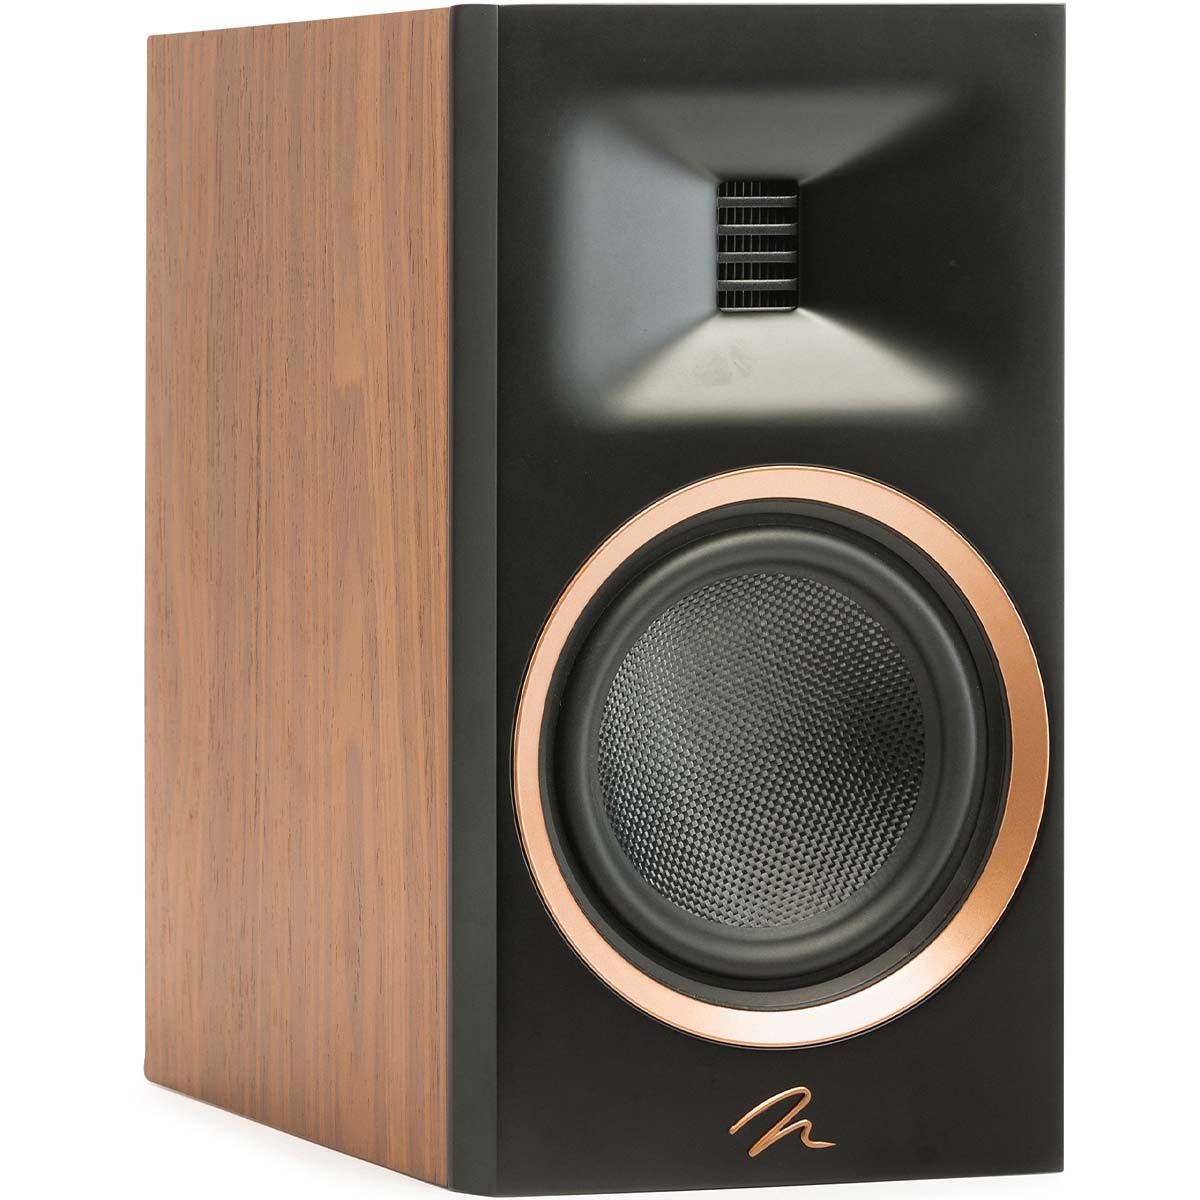 MartinLogan Motion XT B10  Bookshelf Speaker in walnut, angled view without grilles on white background